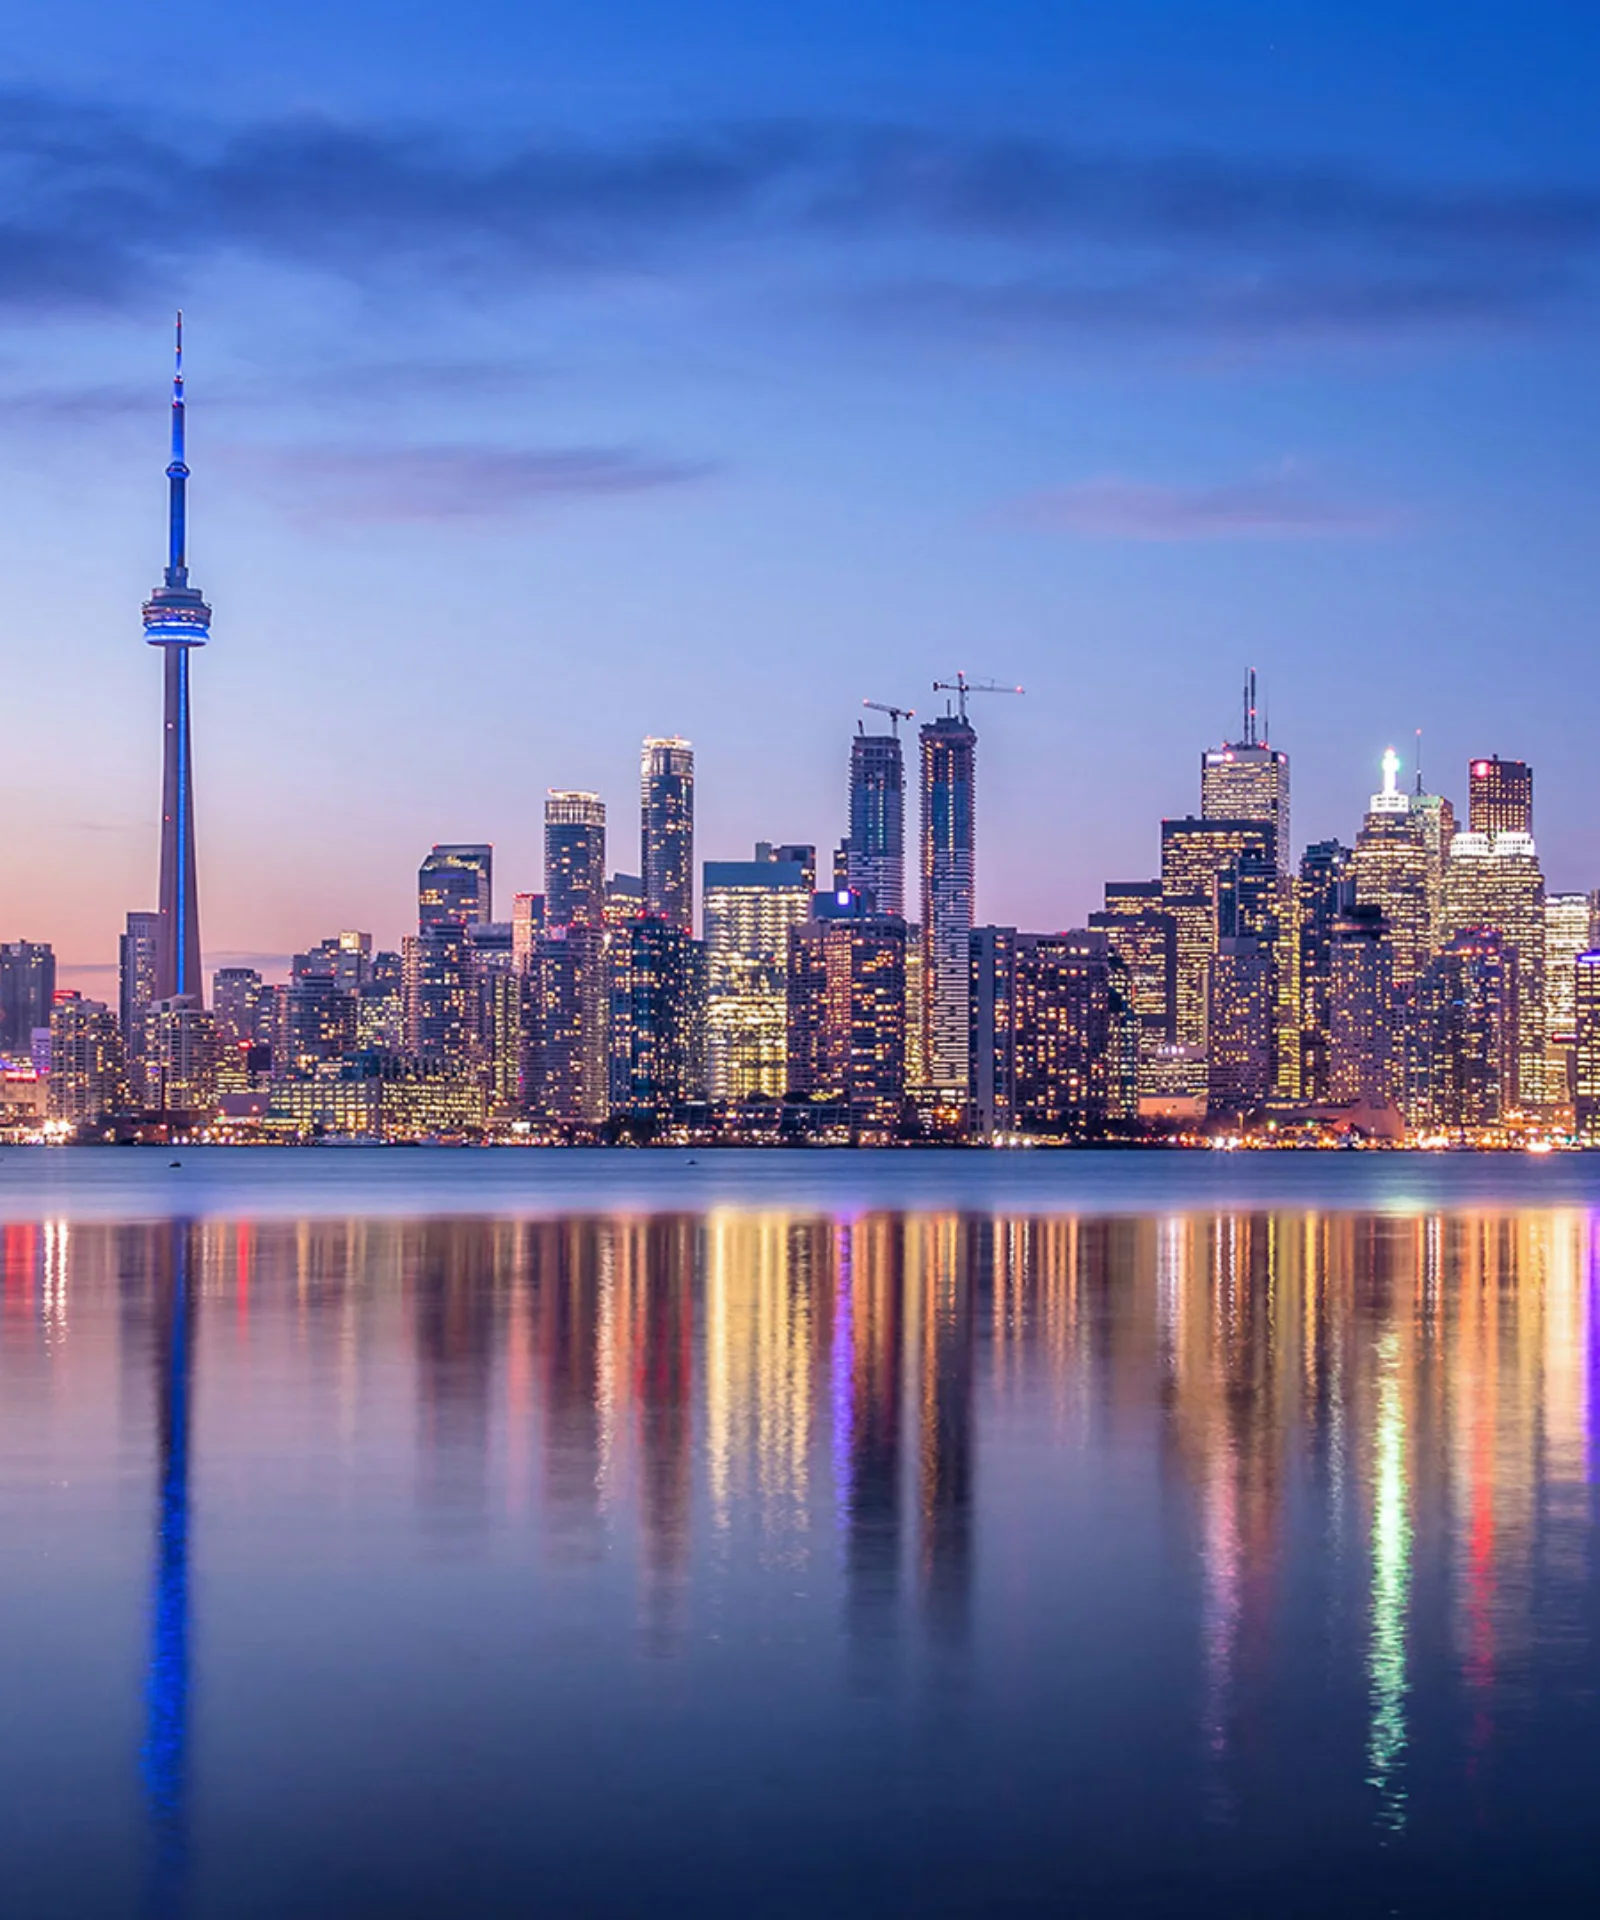 The image features a stunning city skyline at dusk, with tall buildings and the iconic CN Tower prominently visible. The serene water in the foreground reflects the vibrant lights of the city, creating a symmetrical and tranquil scene. This visual captures the essence of stability, growth, and the future, making it an ideal representation for the insurance industry. The clear, calm waters and the well-lit cityscape symbolize the industry&#039;s promise of security, protection, and forward-thinking solutions.